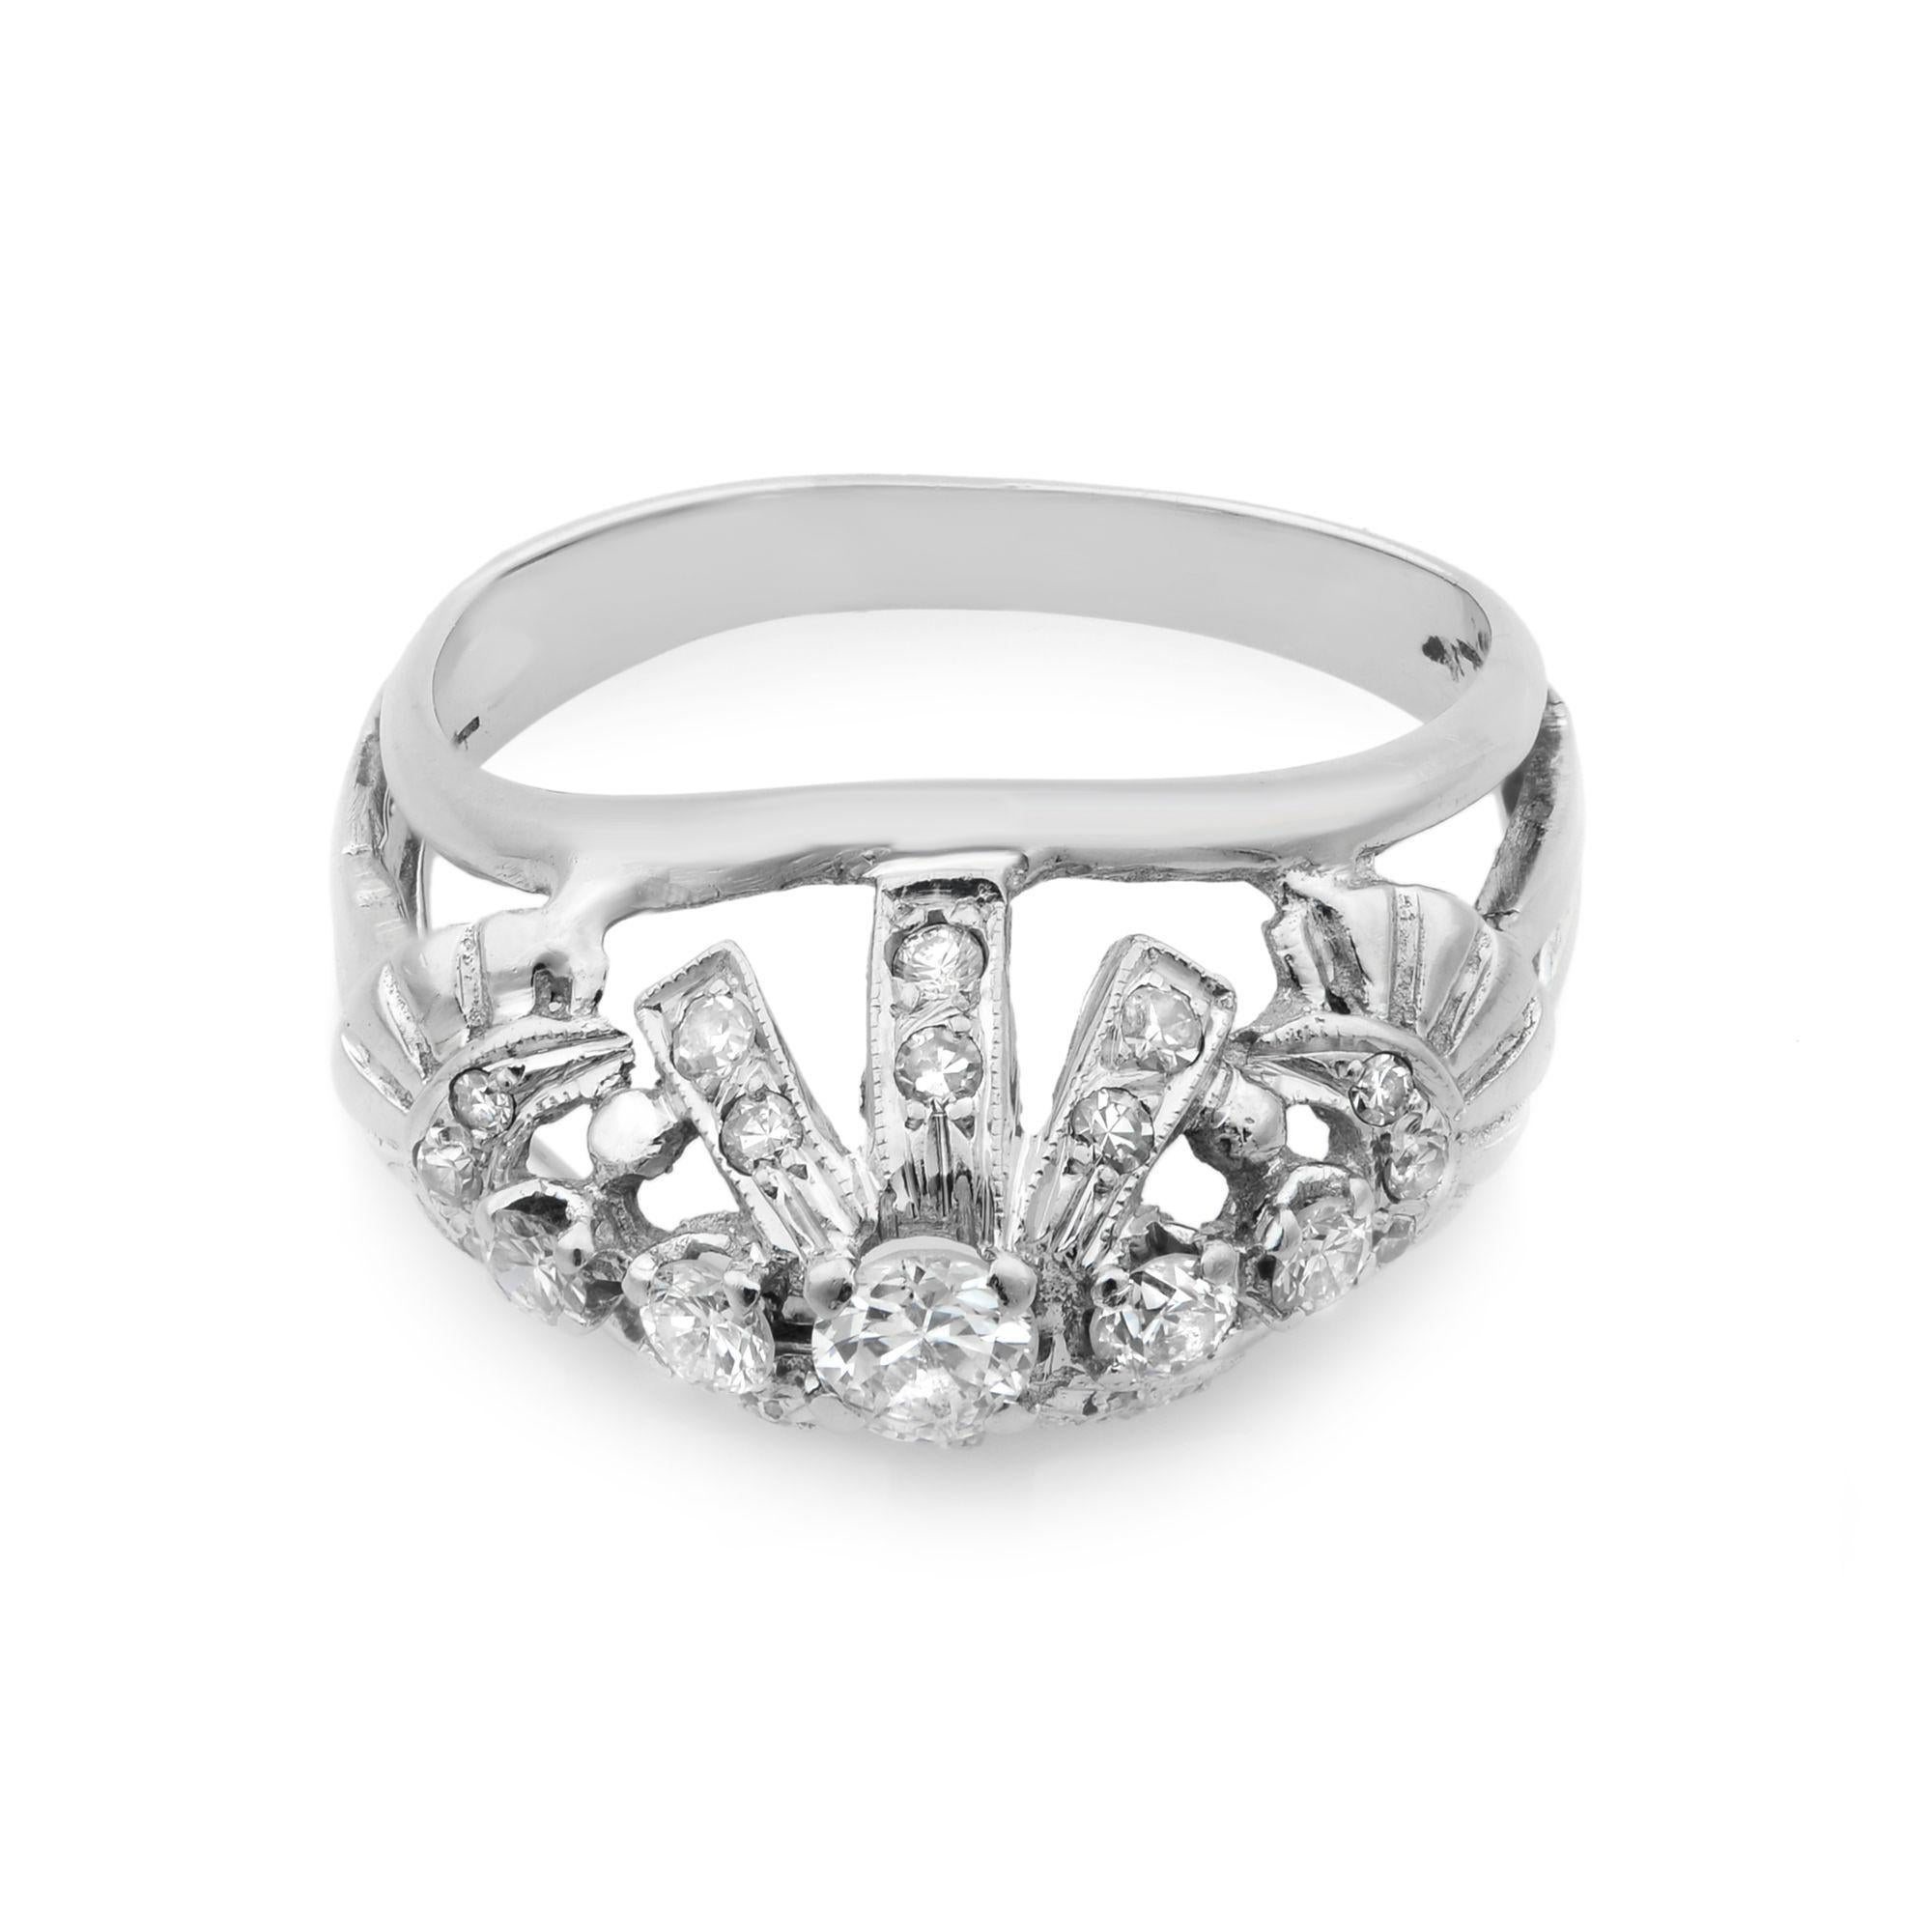 Vintage Dome Diamond Cocktail Ring 14K White Gold 0.36Cttw In Excellent Condition For Sale In New York, NY